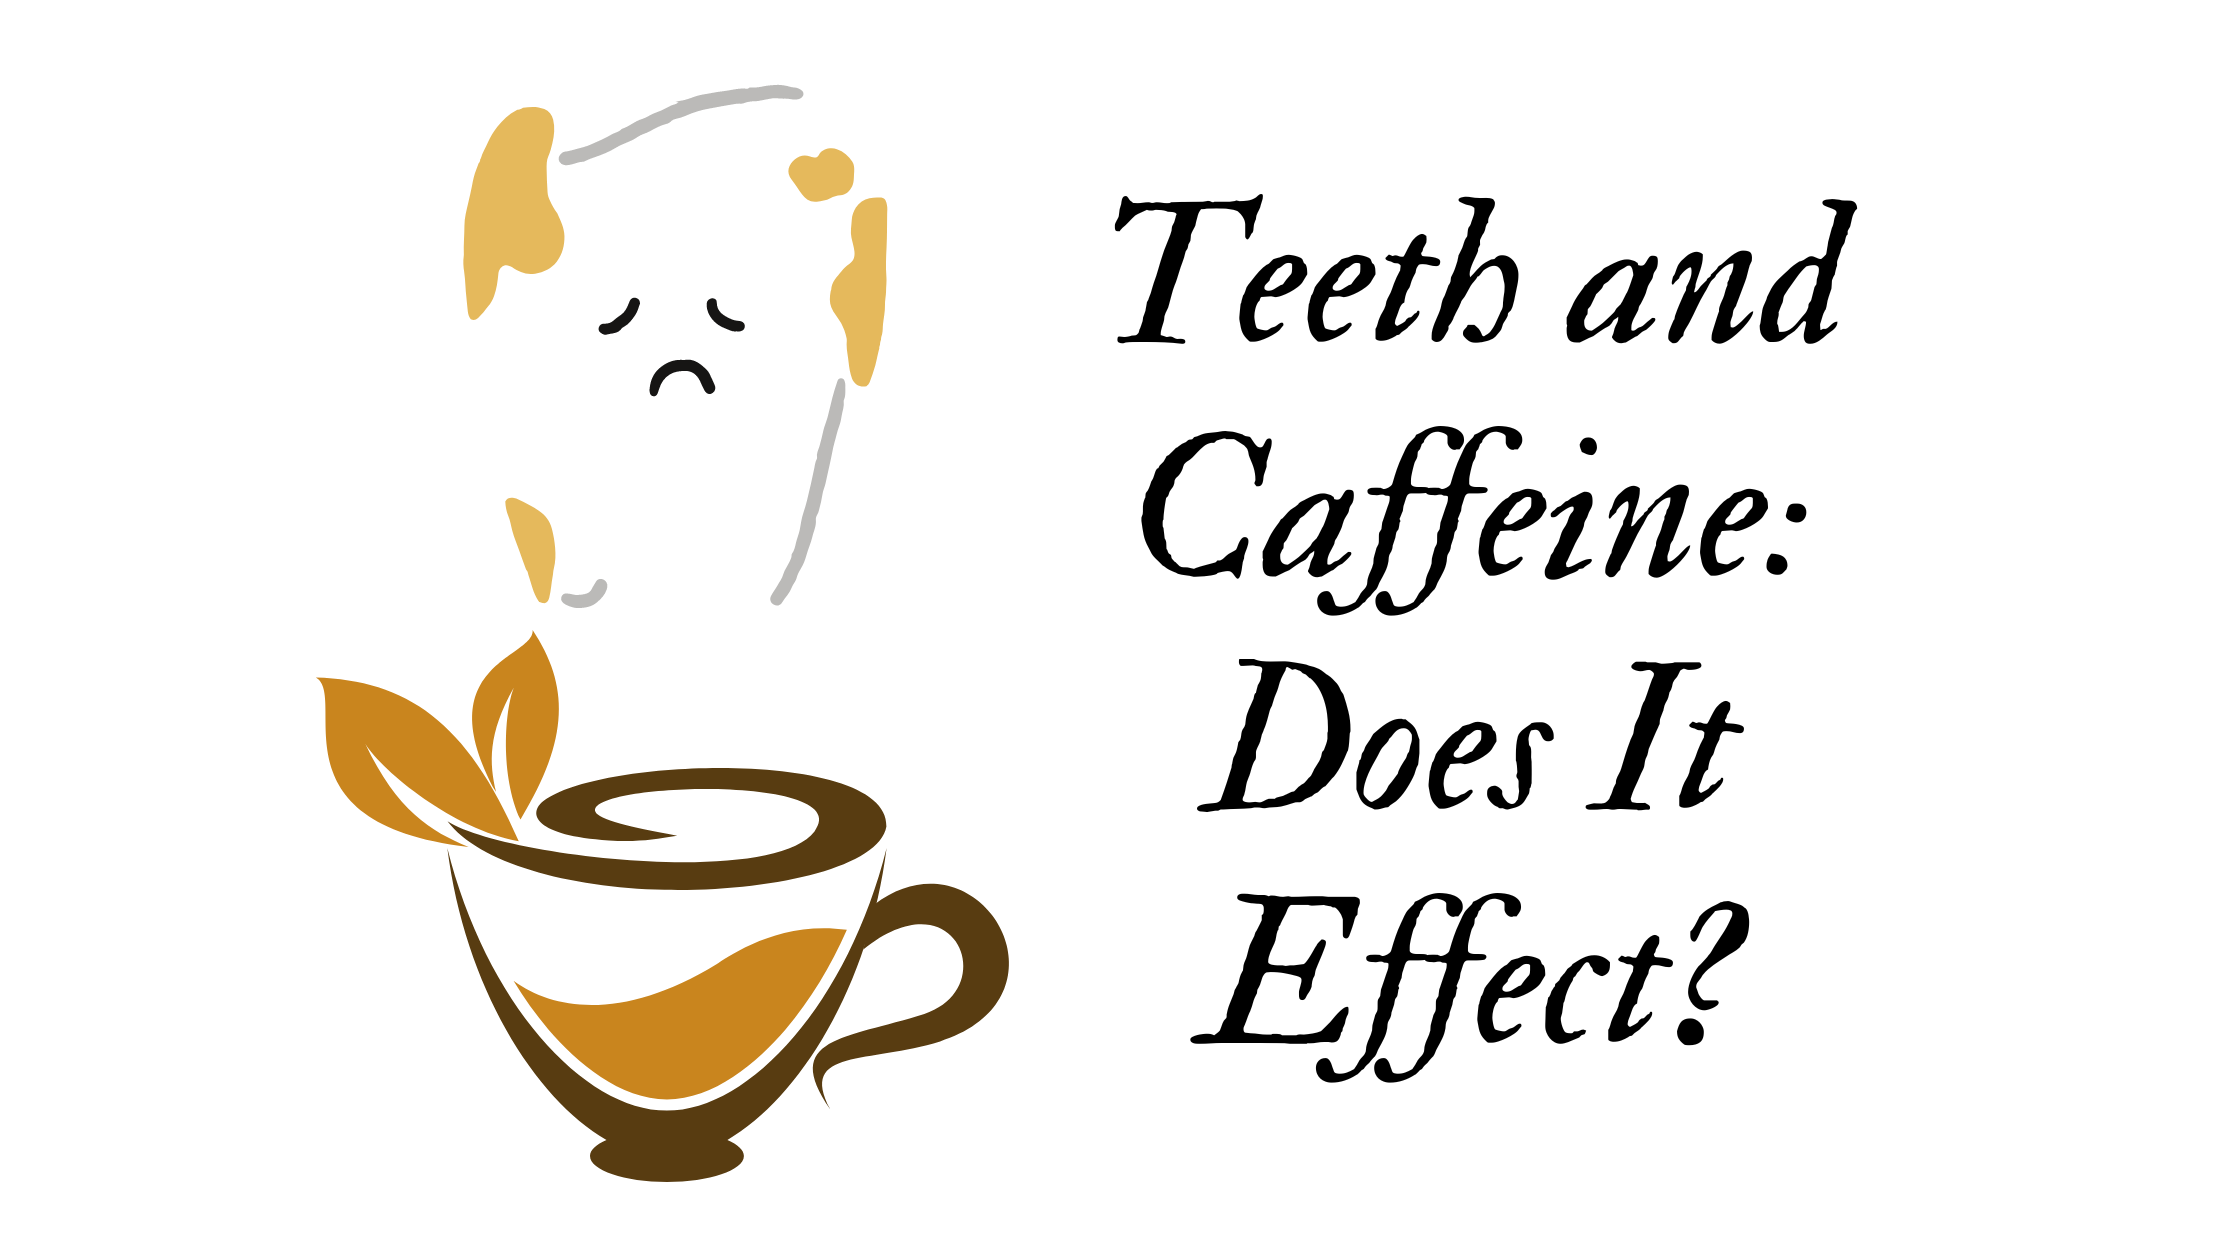 Teeth and Caffeine: Does It Effect?